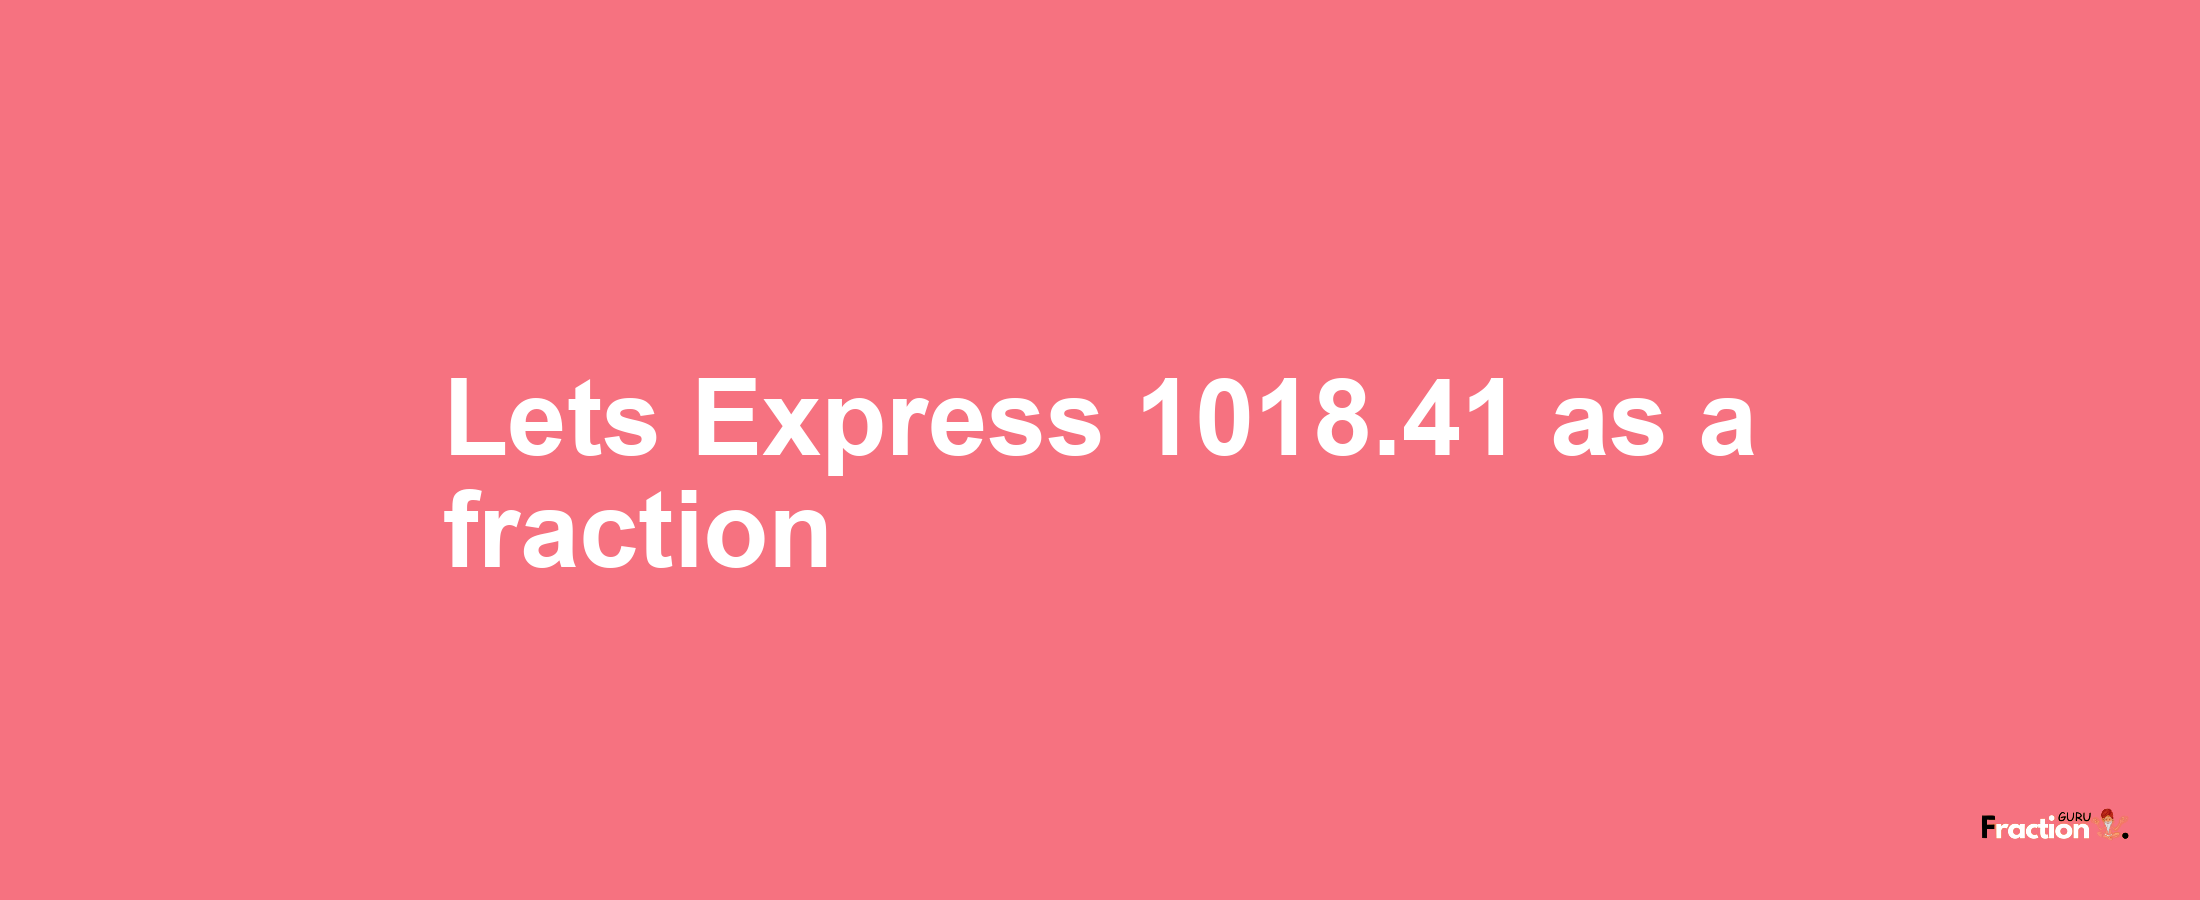 Lets Express 1018.41 as afraction